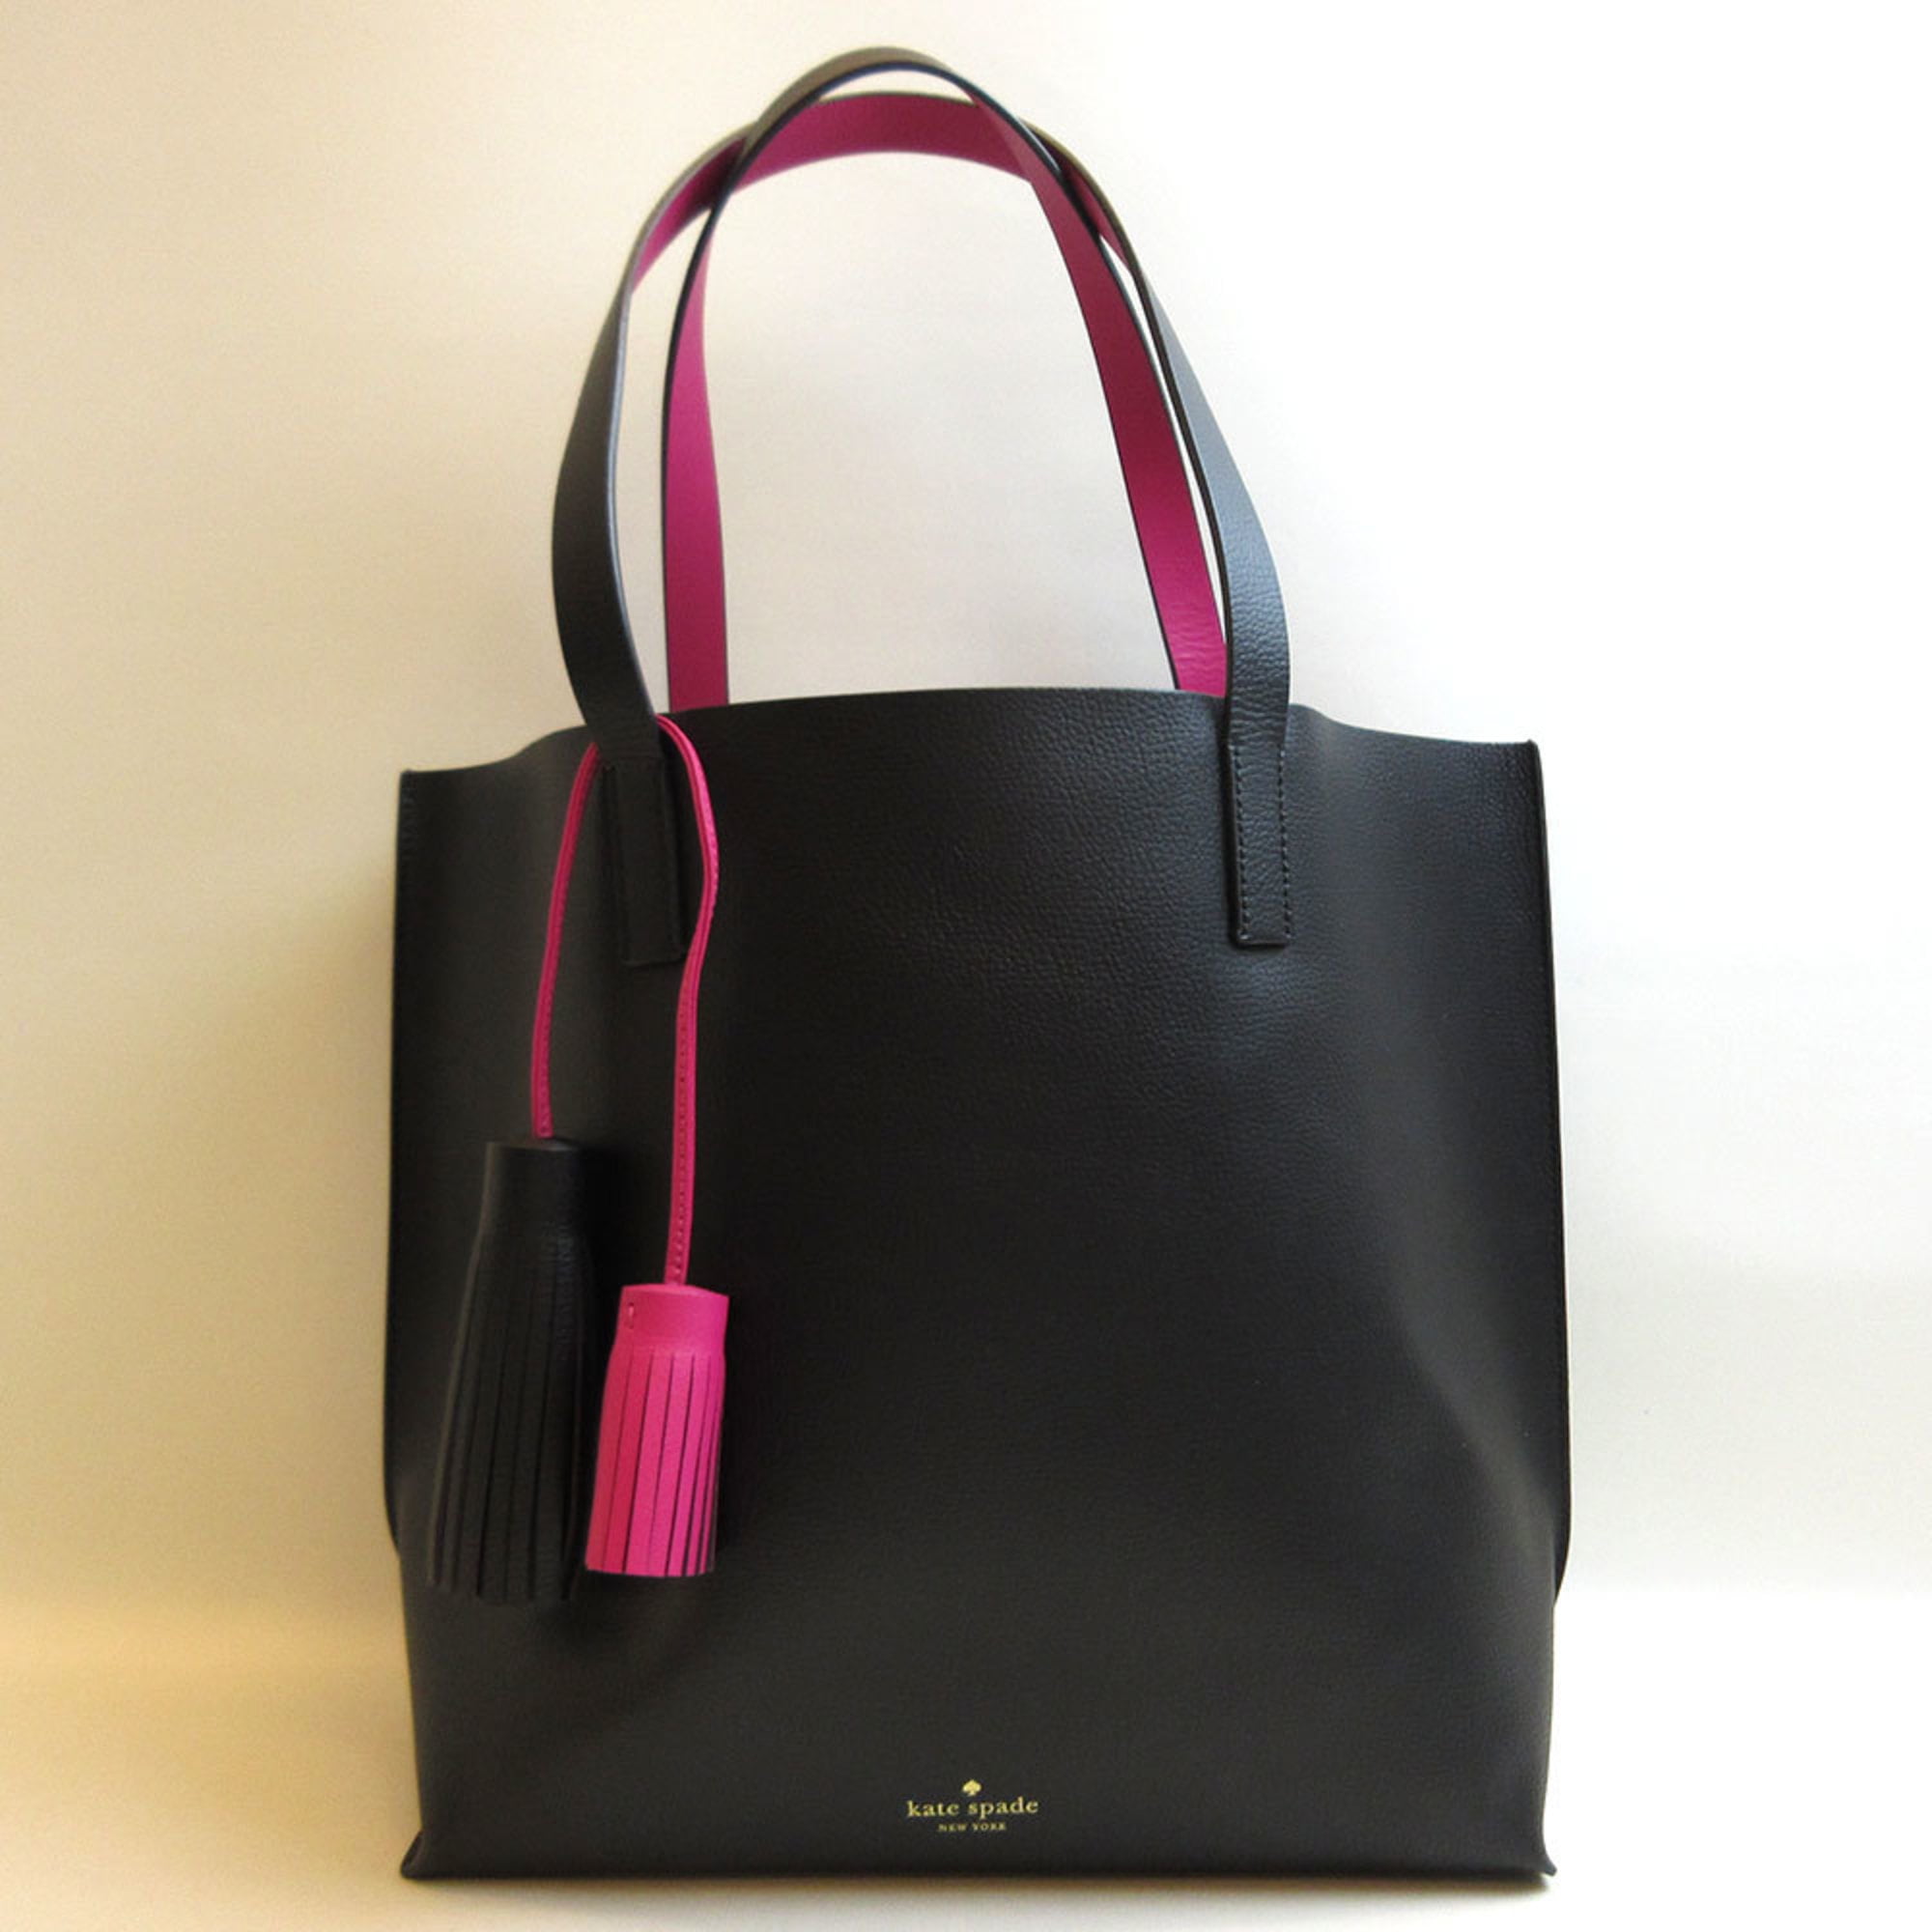 Authenticated Used Kate Spade Leather Tote Bag Black Pink Ladies -  